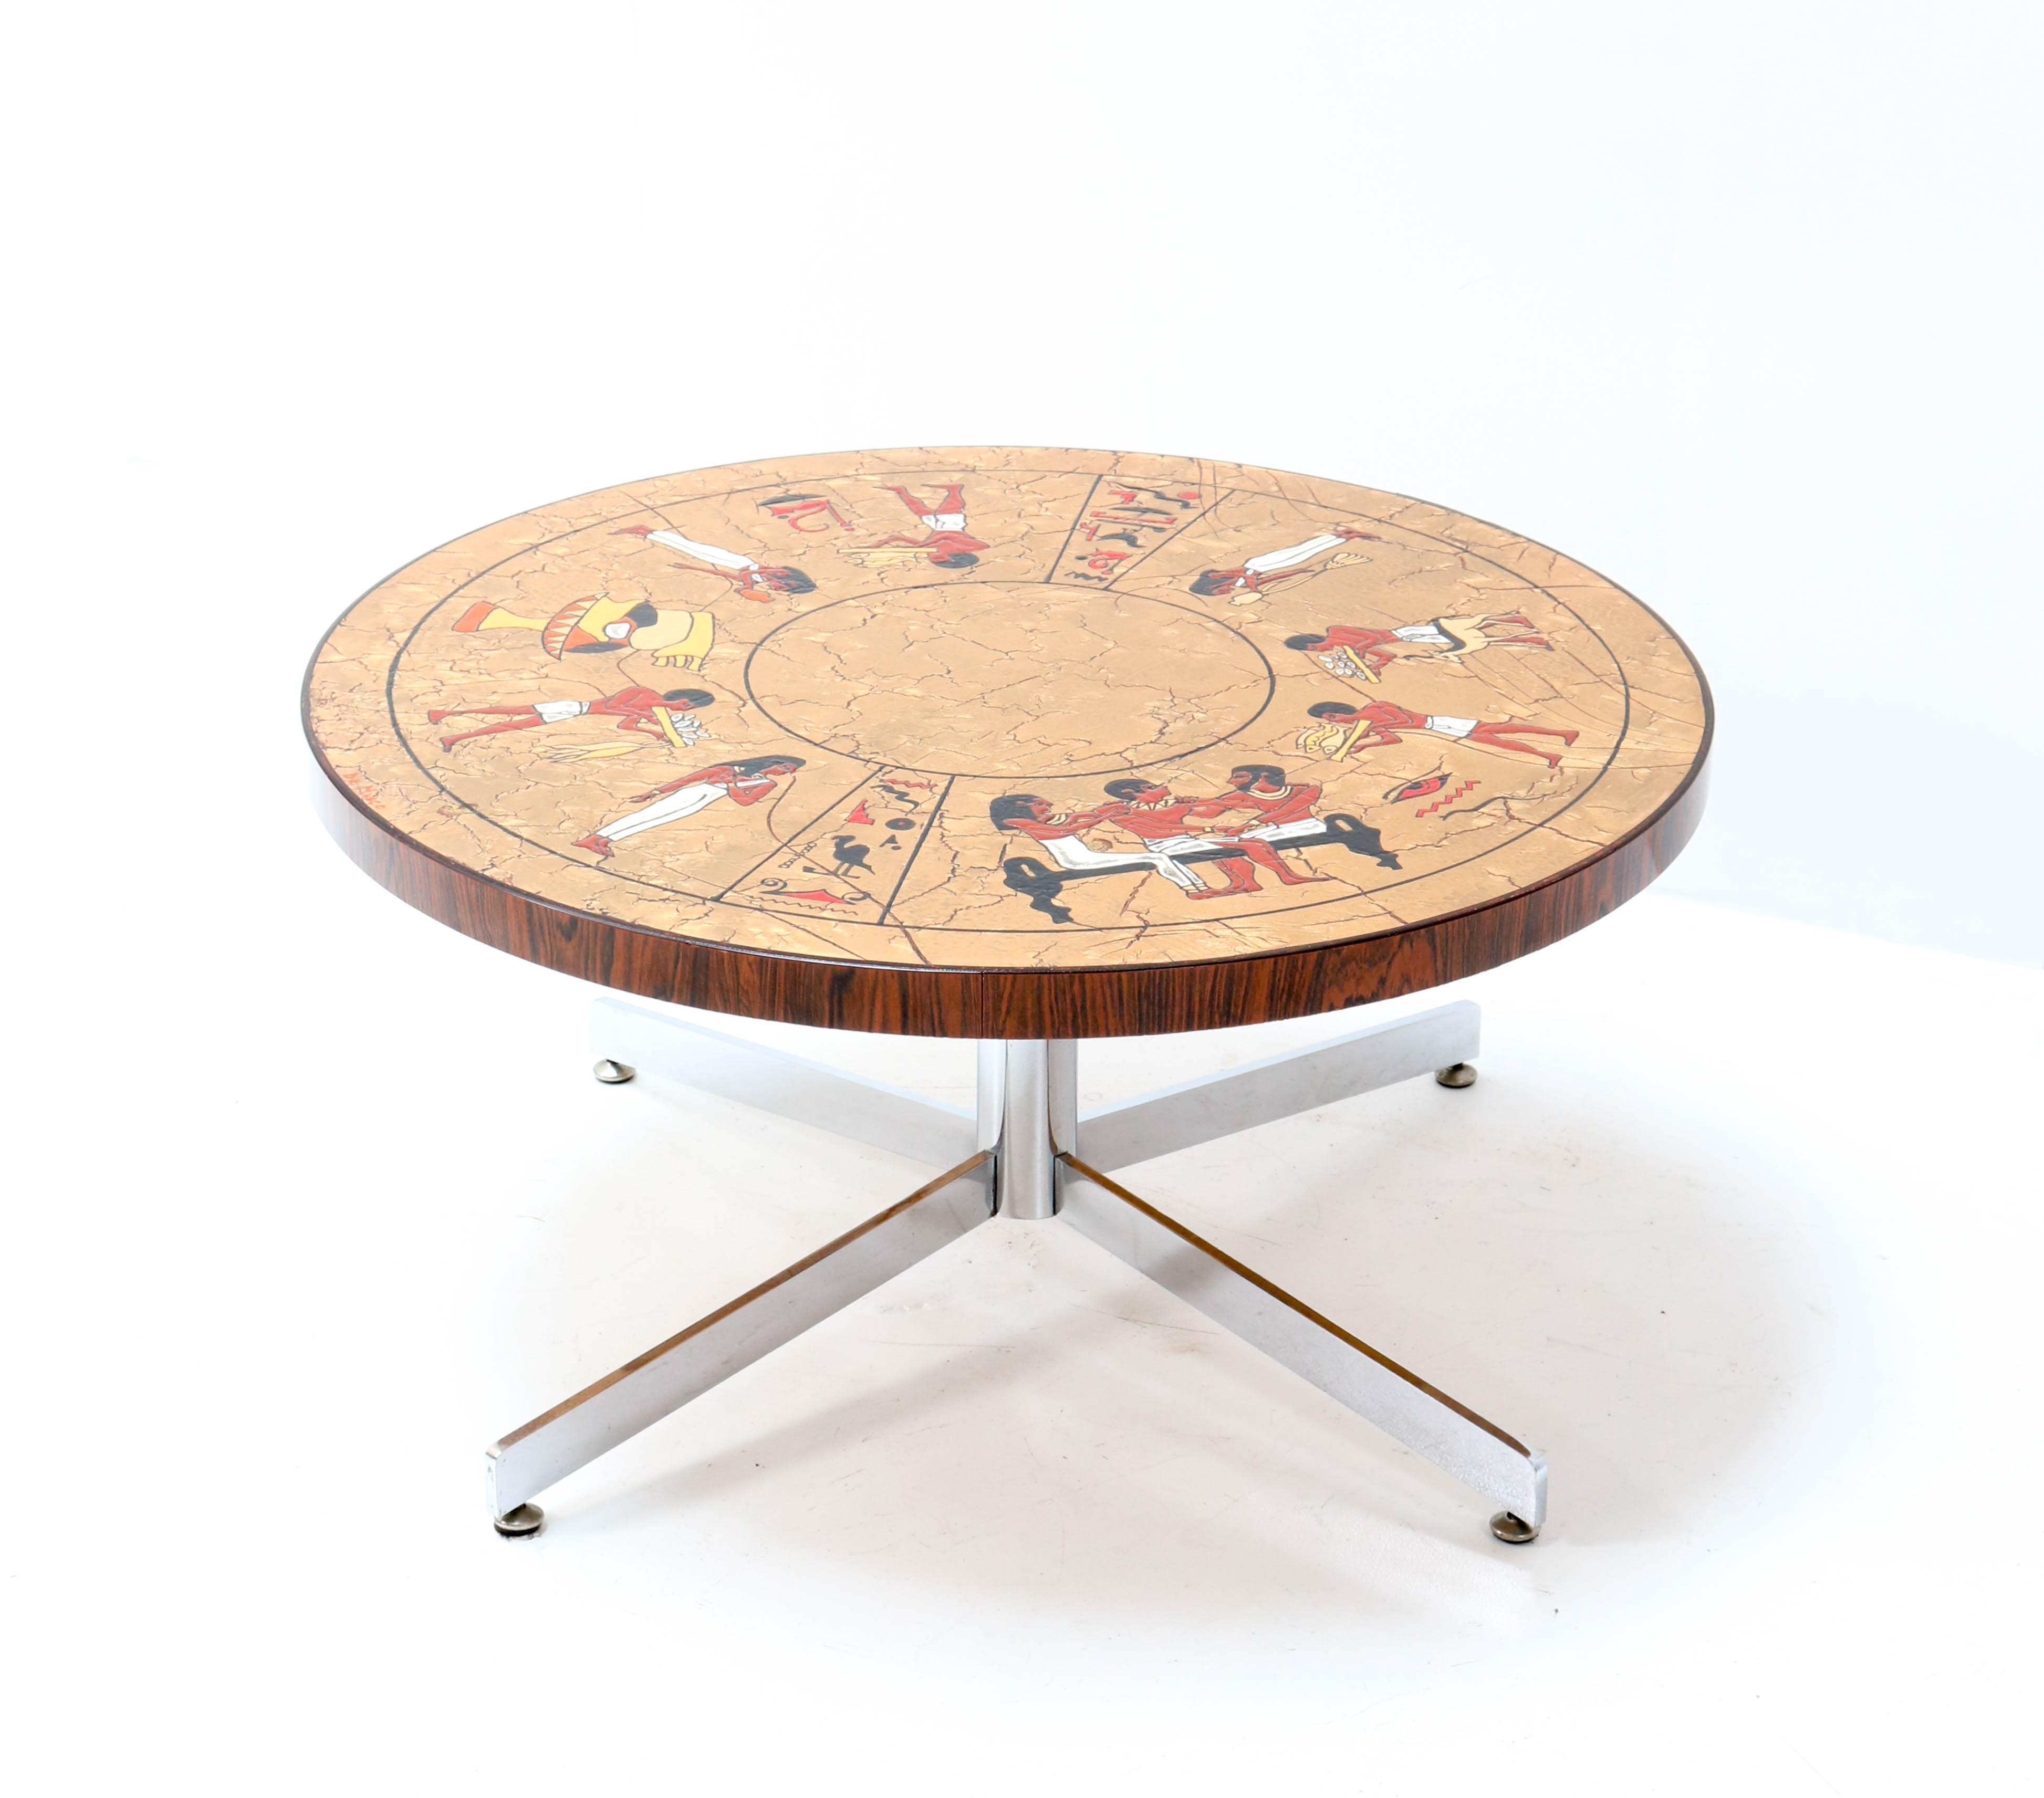 Belgian Belgium Mid-Century Modern Coffee Table with Tiles by Denisco, 1970s For Sale